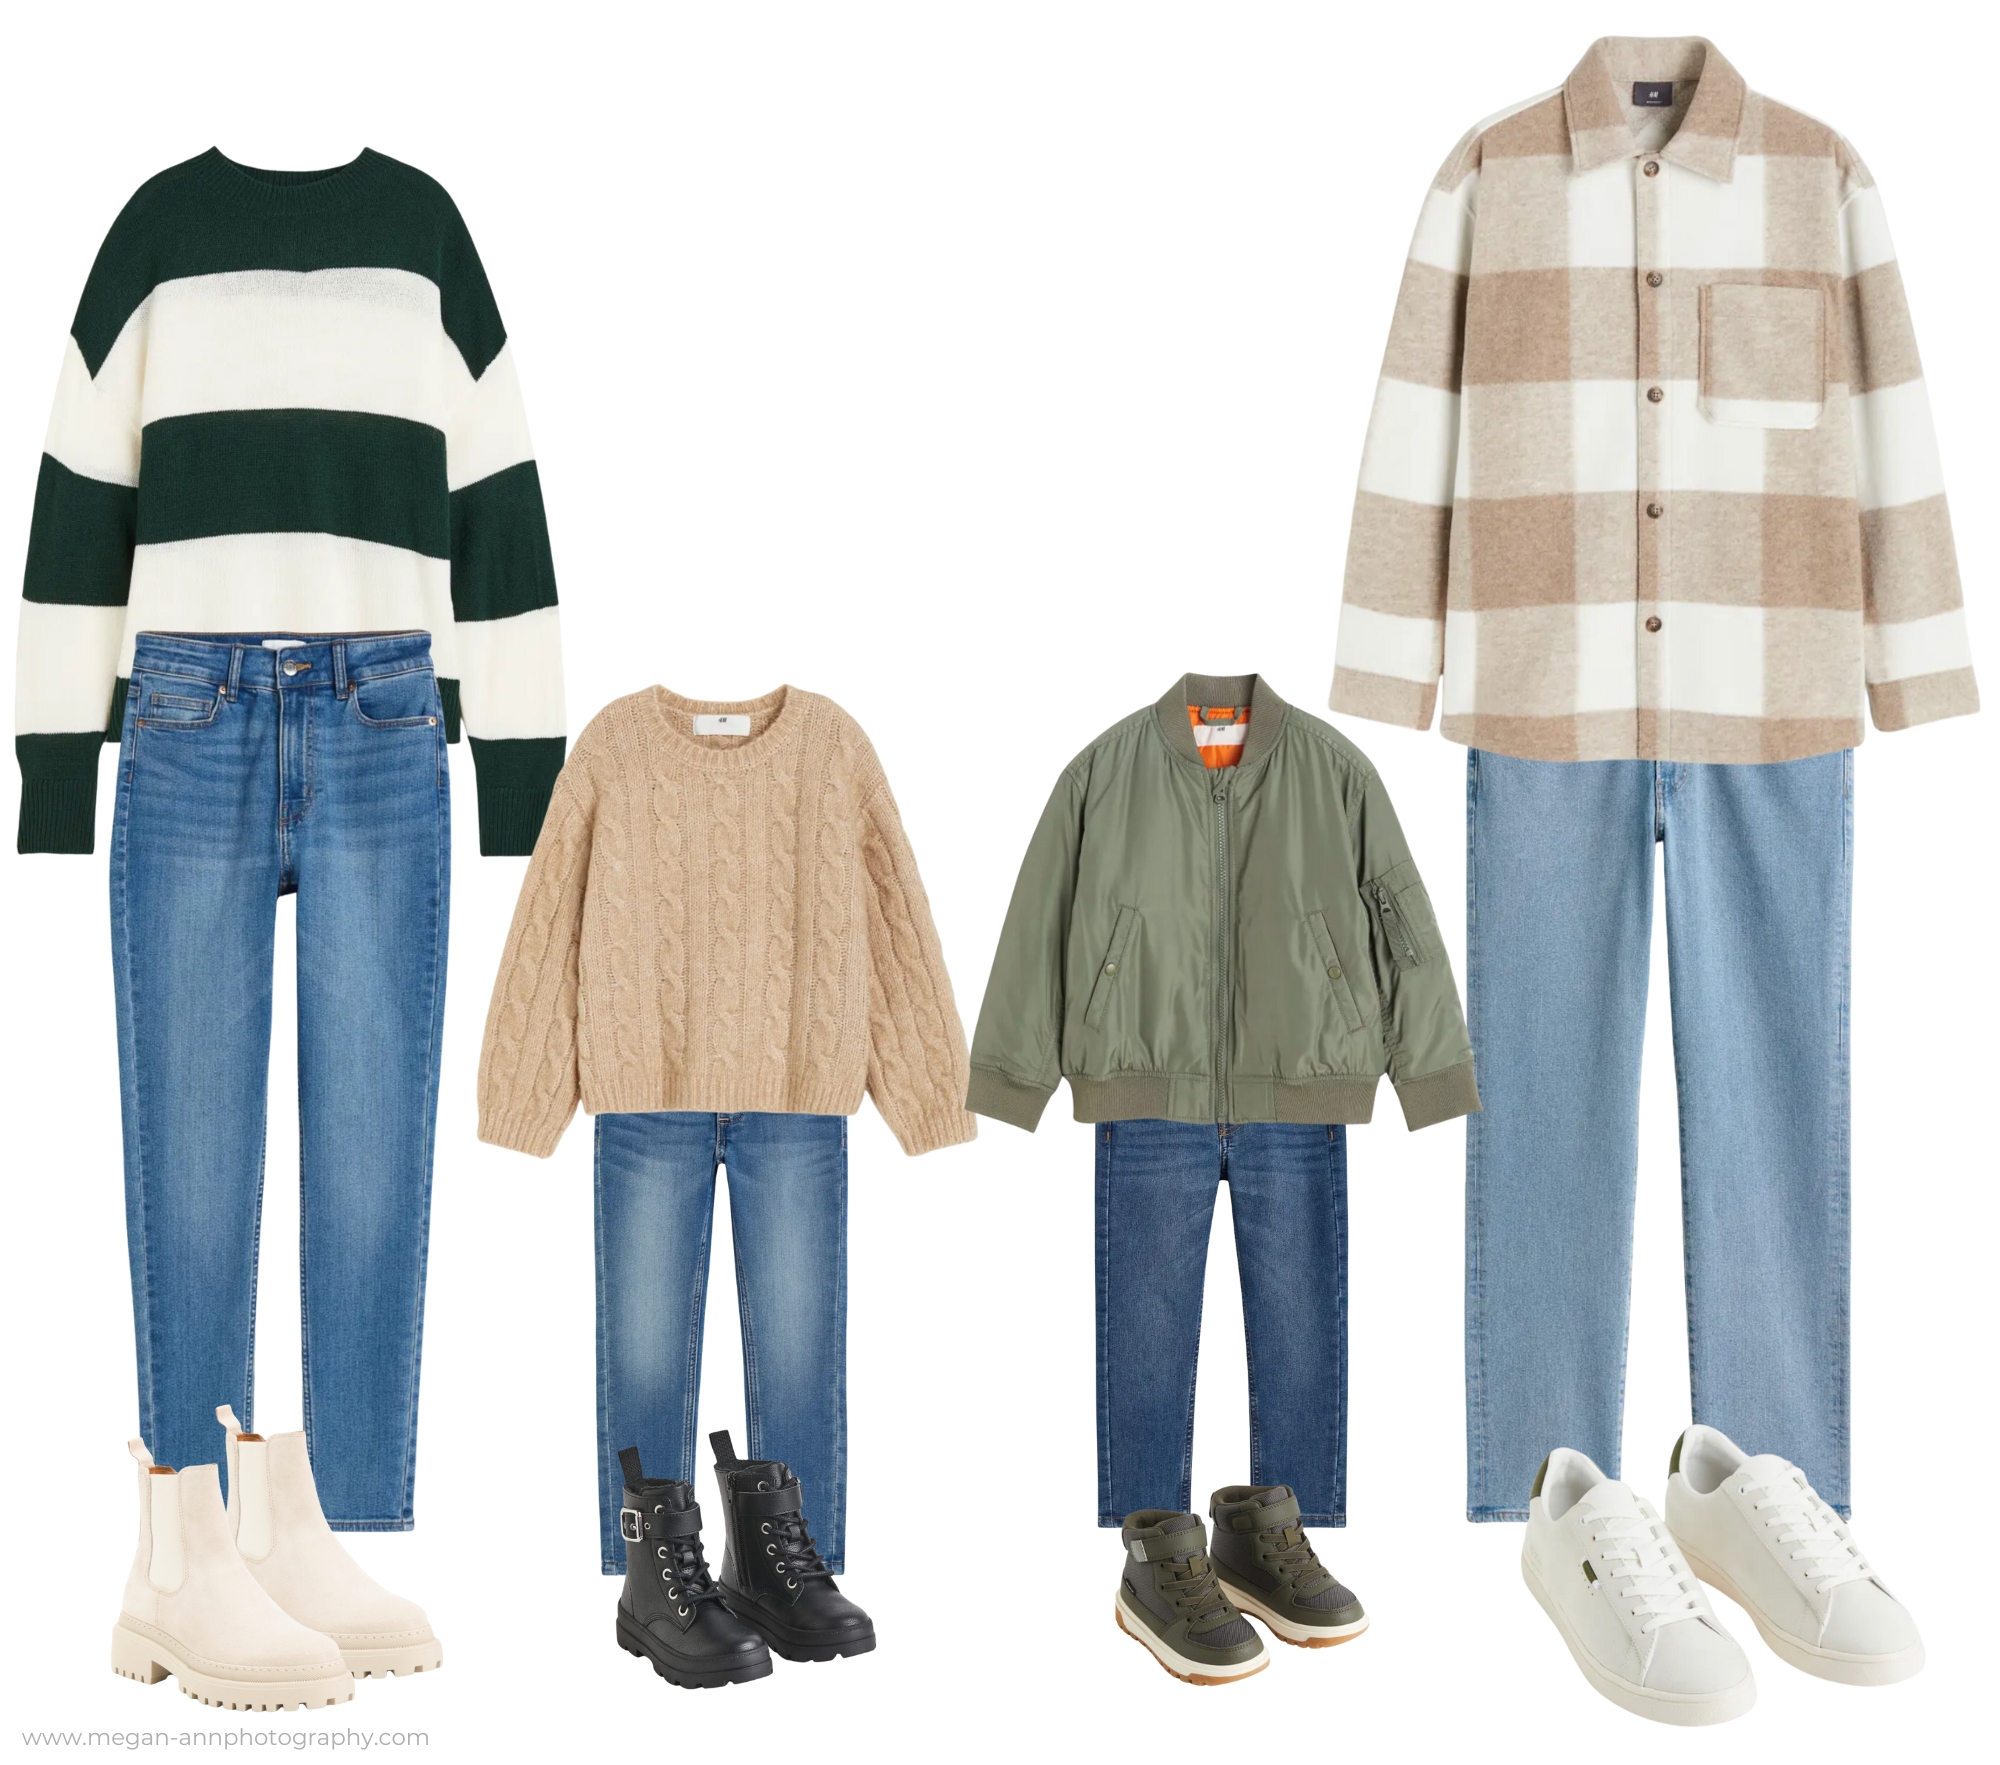 winter family outfit collage in the colors beige, green and blue